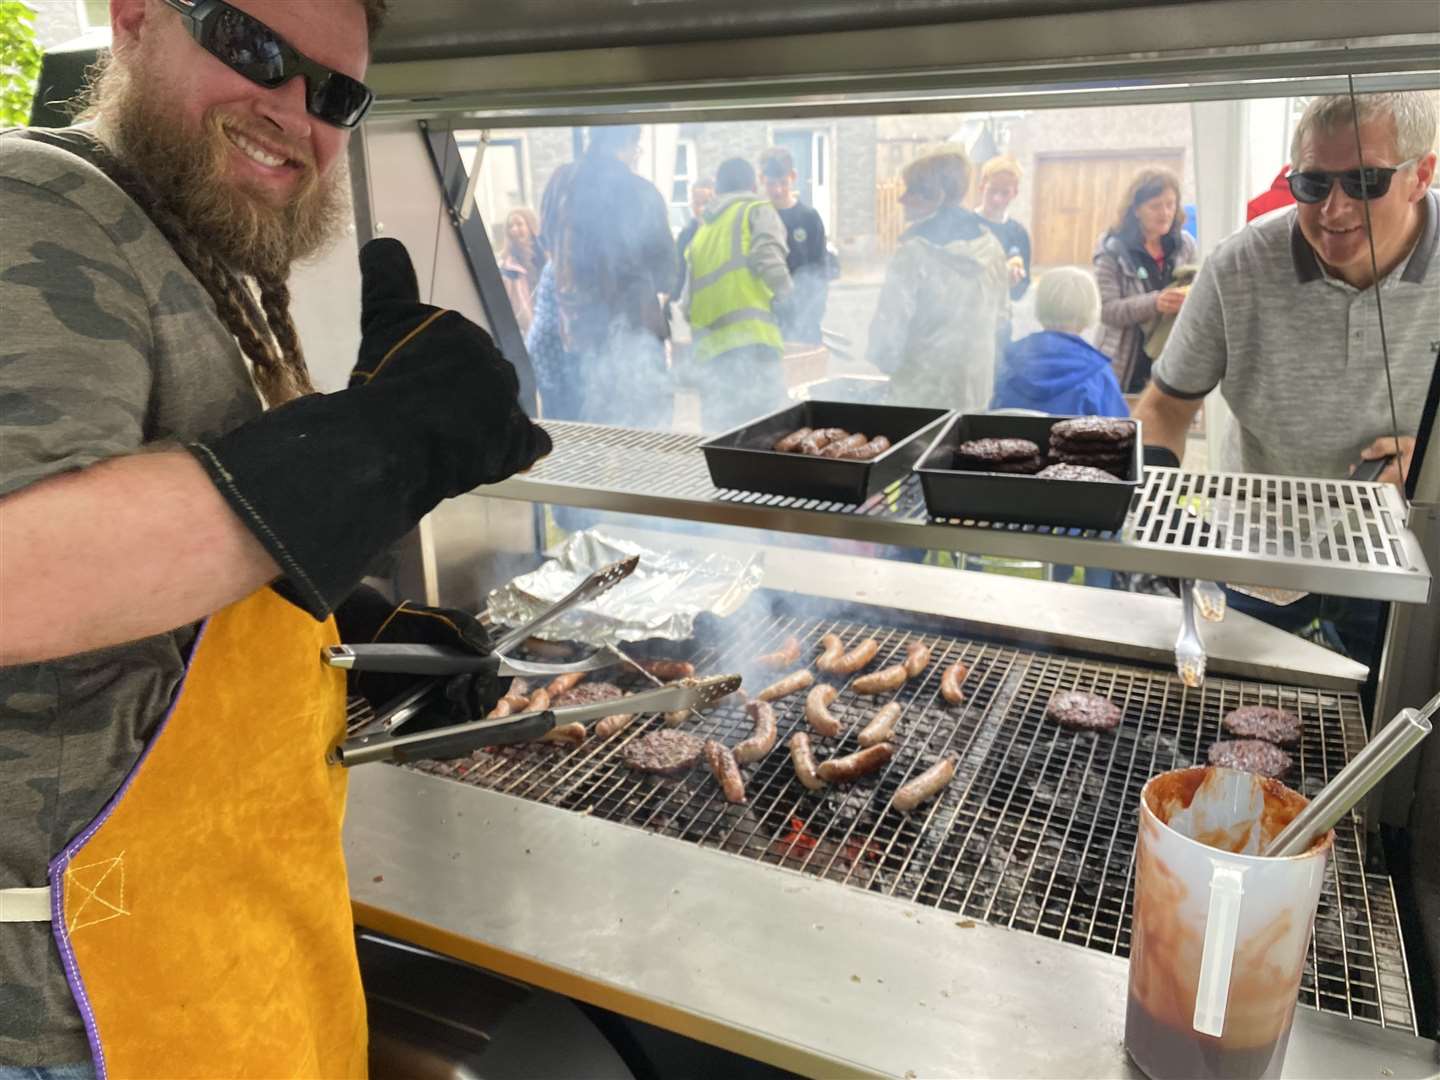 Volunteers helped make the barbecue a sizzling success.